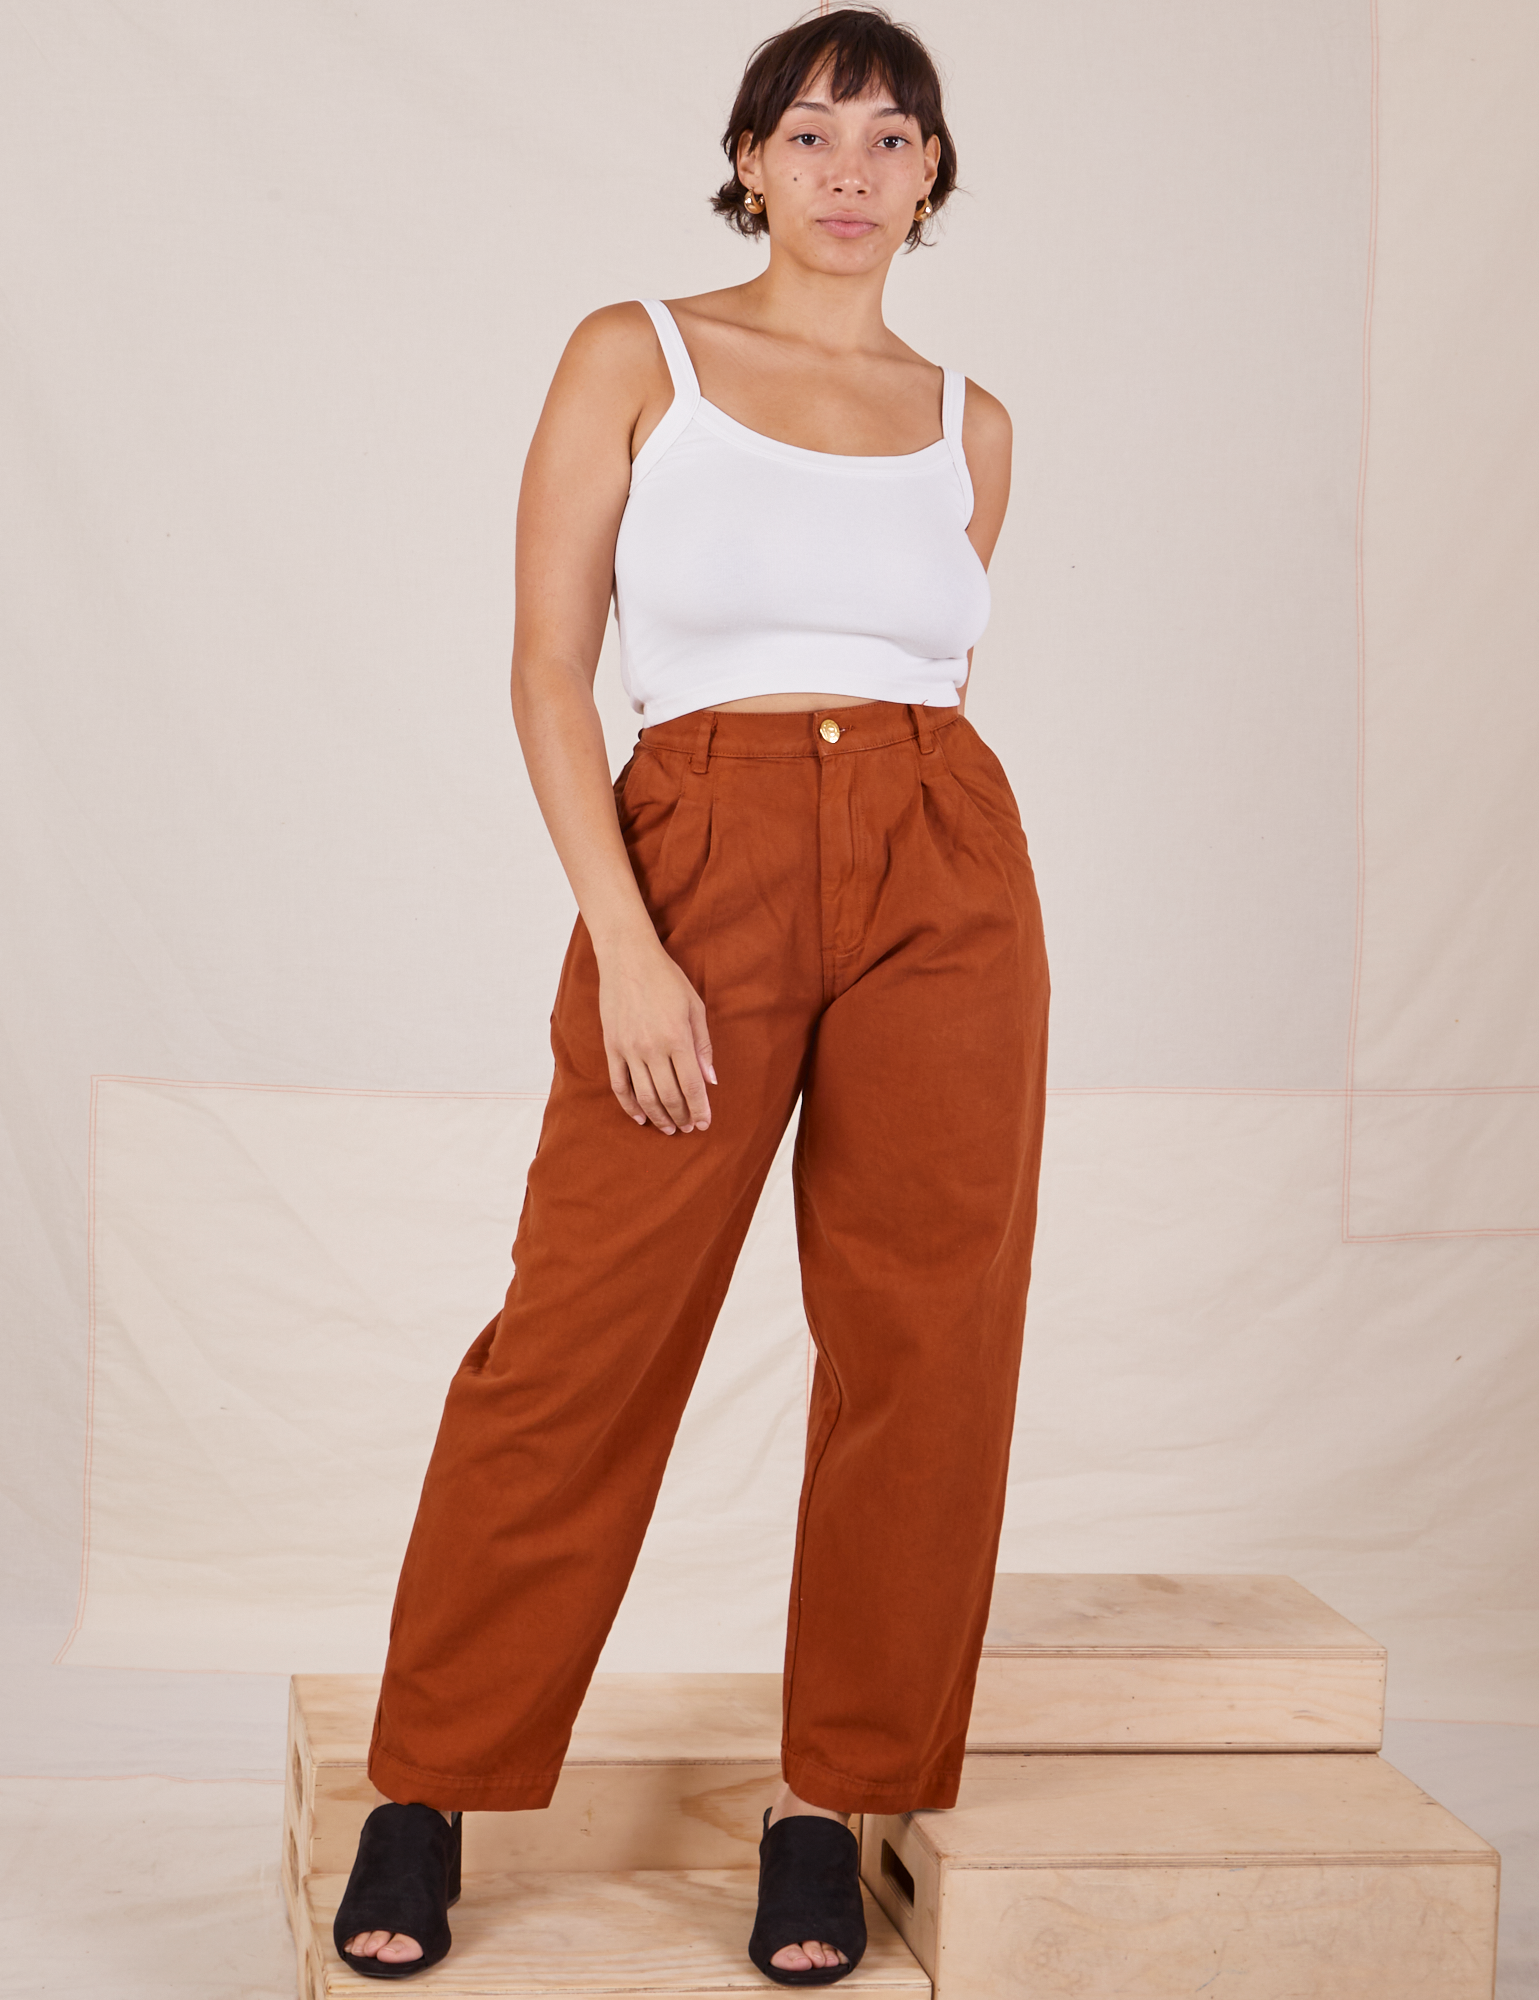 Tiara is 5&#39;4&quot; and wearing S Heavyweight Trousers in Burnt Terracotta paired with vintage off-white Cropped Cami